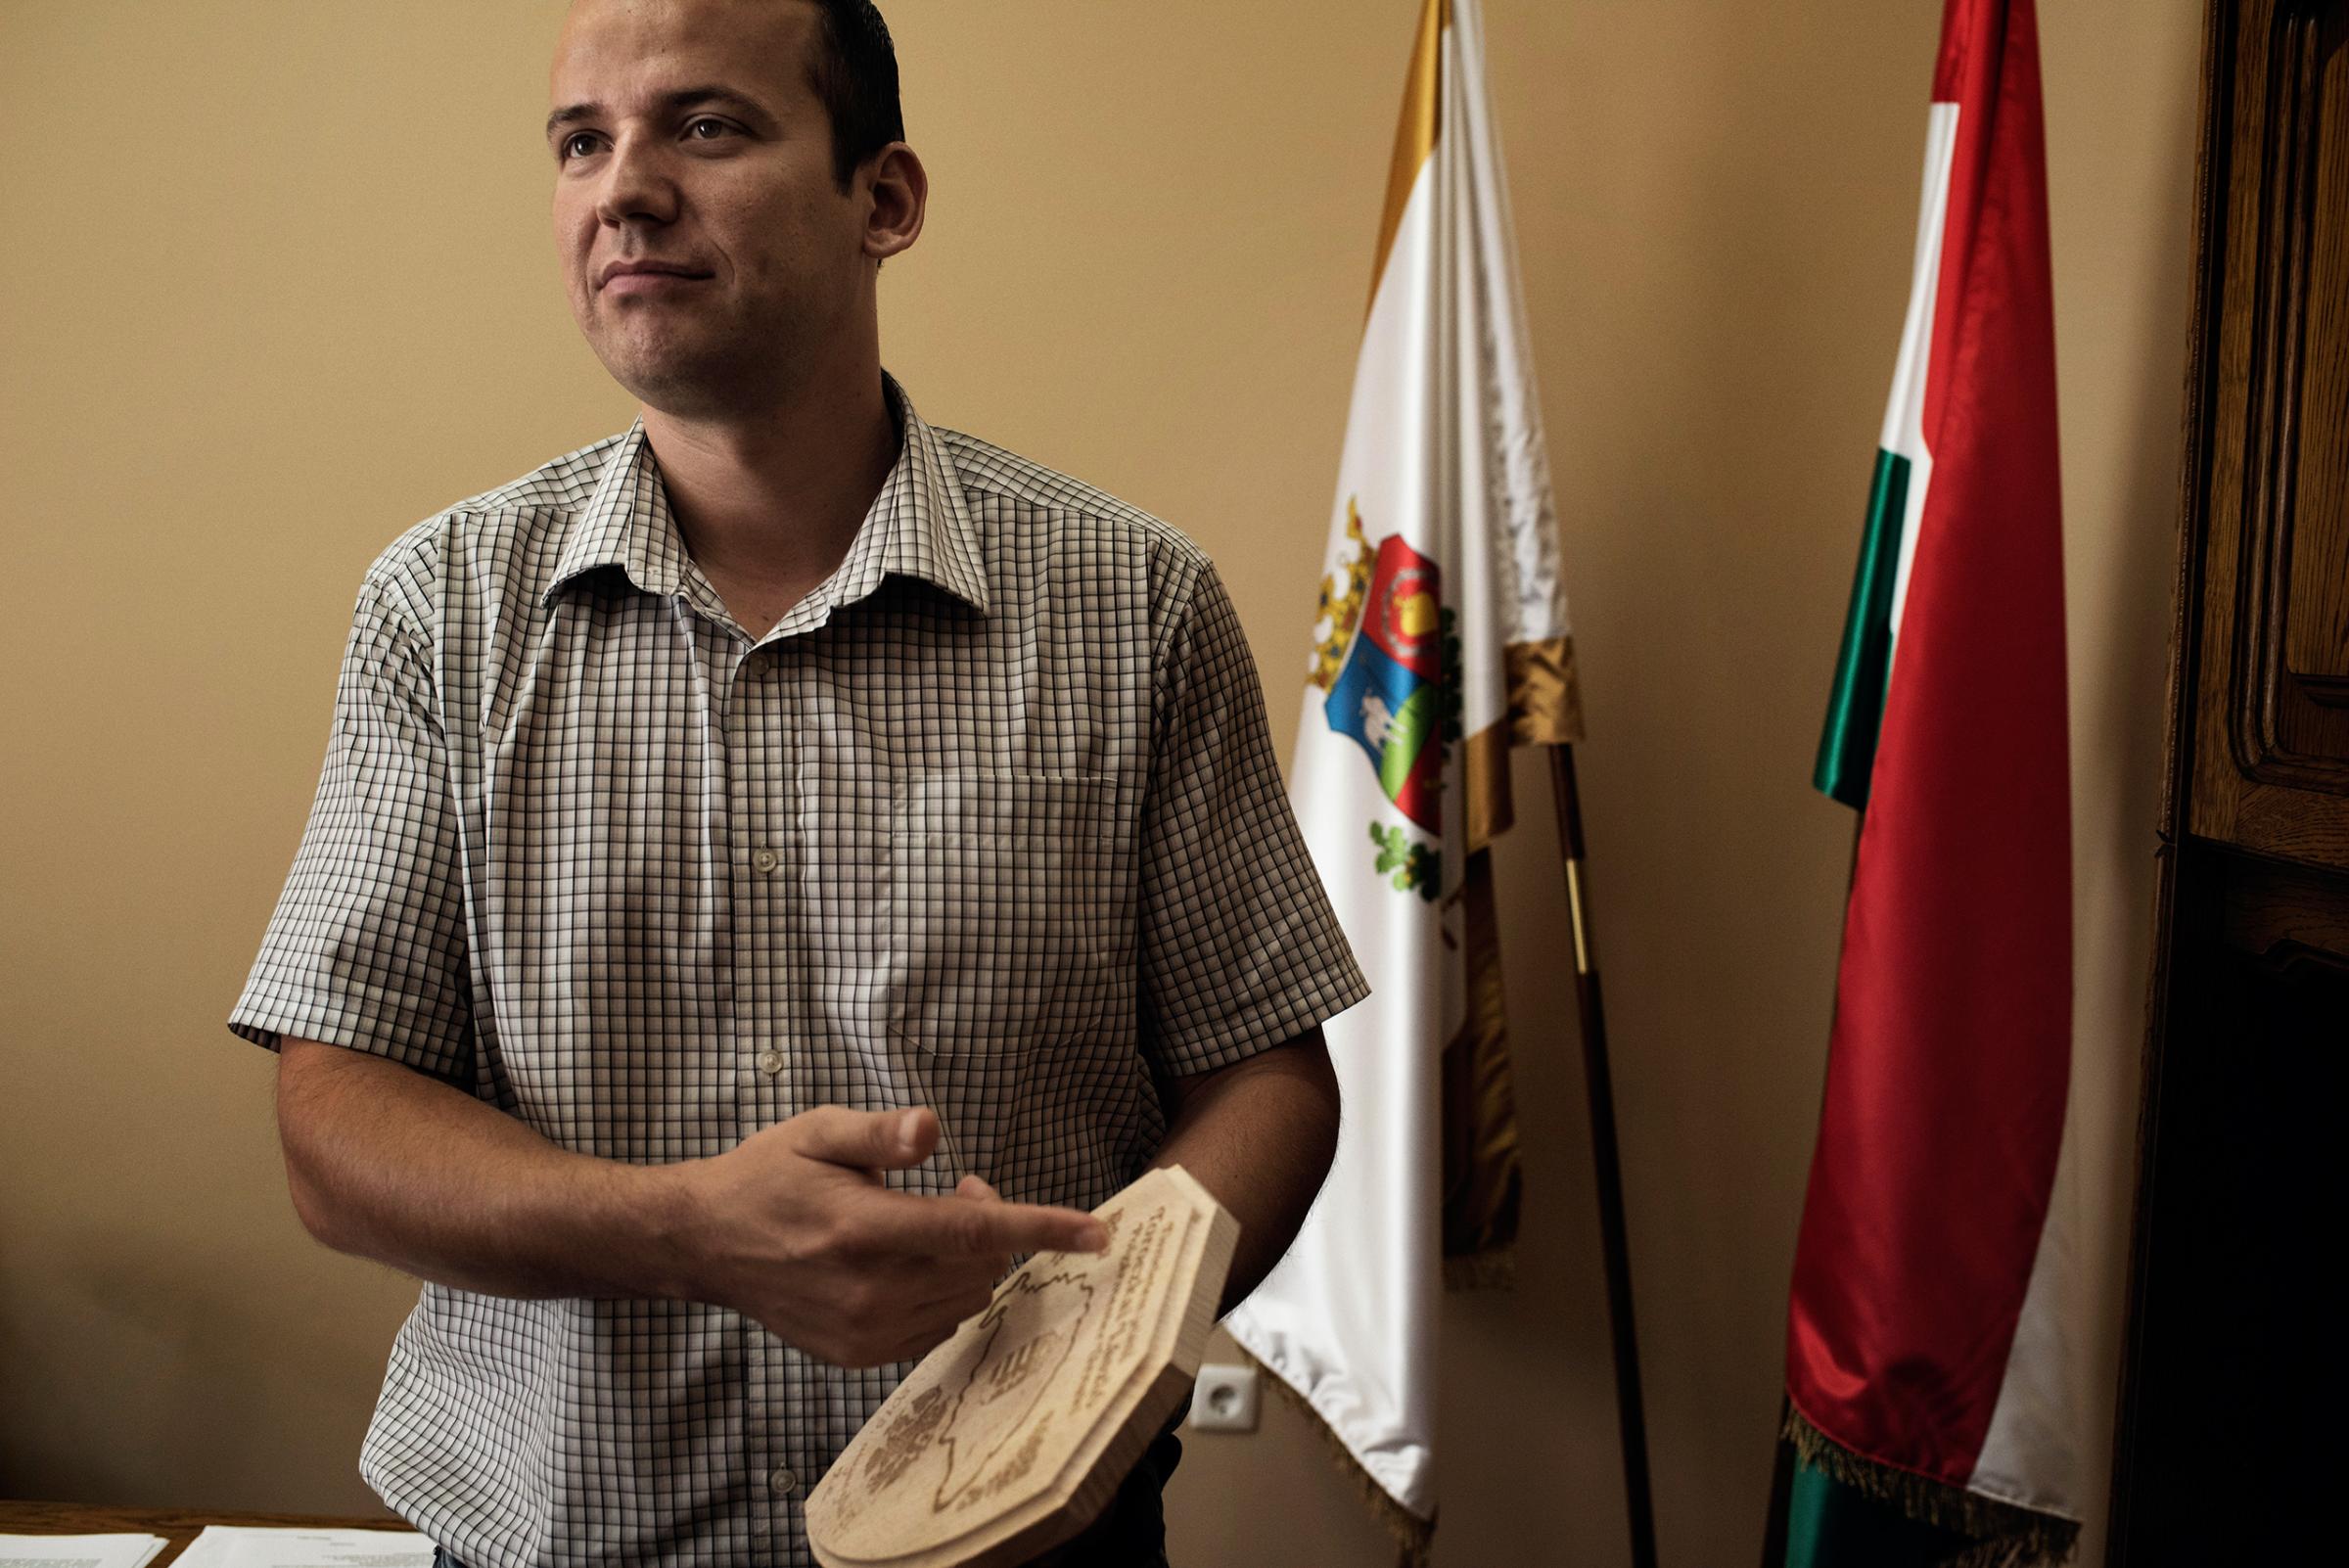 László Toroczkai, the charismatic young mayor of a Hungarian town right on the border with Serbia, in Ásotthalom, September 2015. Toroczkai became a national celebrity for his extreme anti-migration and anti-Islamic views.